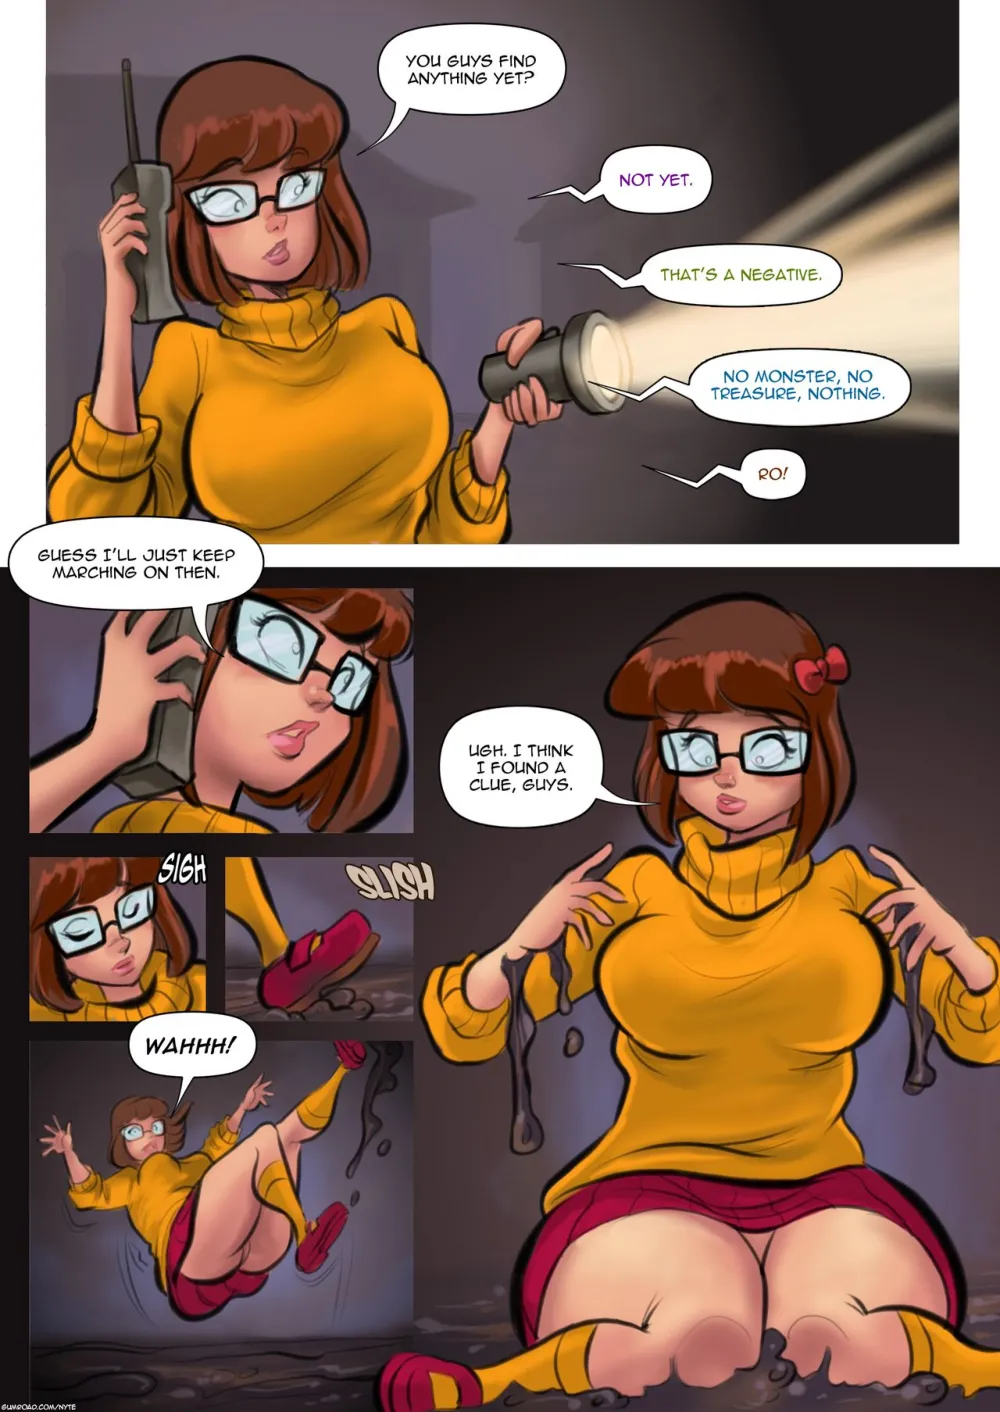 The Mysterious Disappearance of Velma Dinkley - Page 2